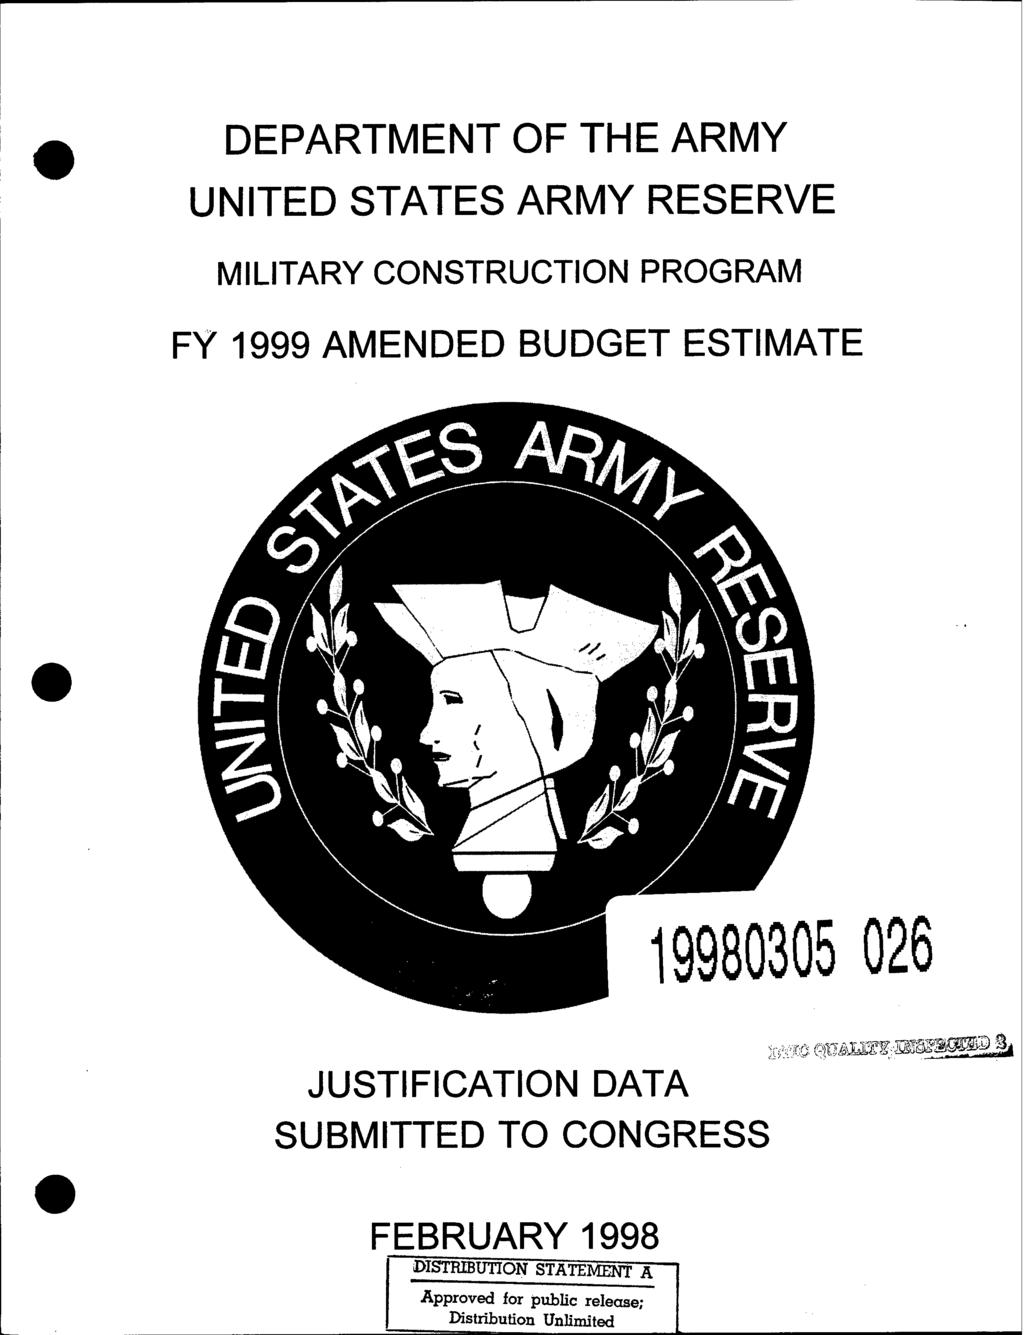 DEPARTMENT OF THE ARMY UNITED STATES ARMY RESERVE MILITARY CONSTRUCTION PROGRAM FY 1999 AMENDED BUDGET ESTIMATE 199835 26 JUSTIFICATION